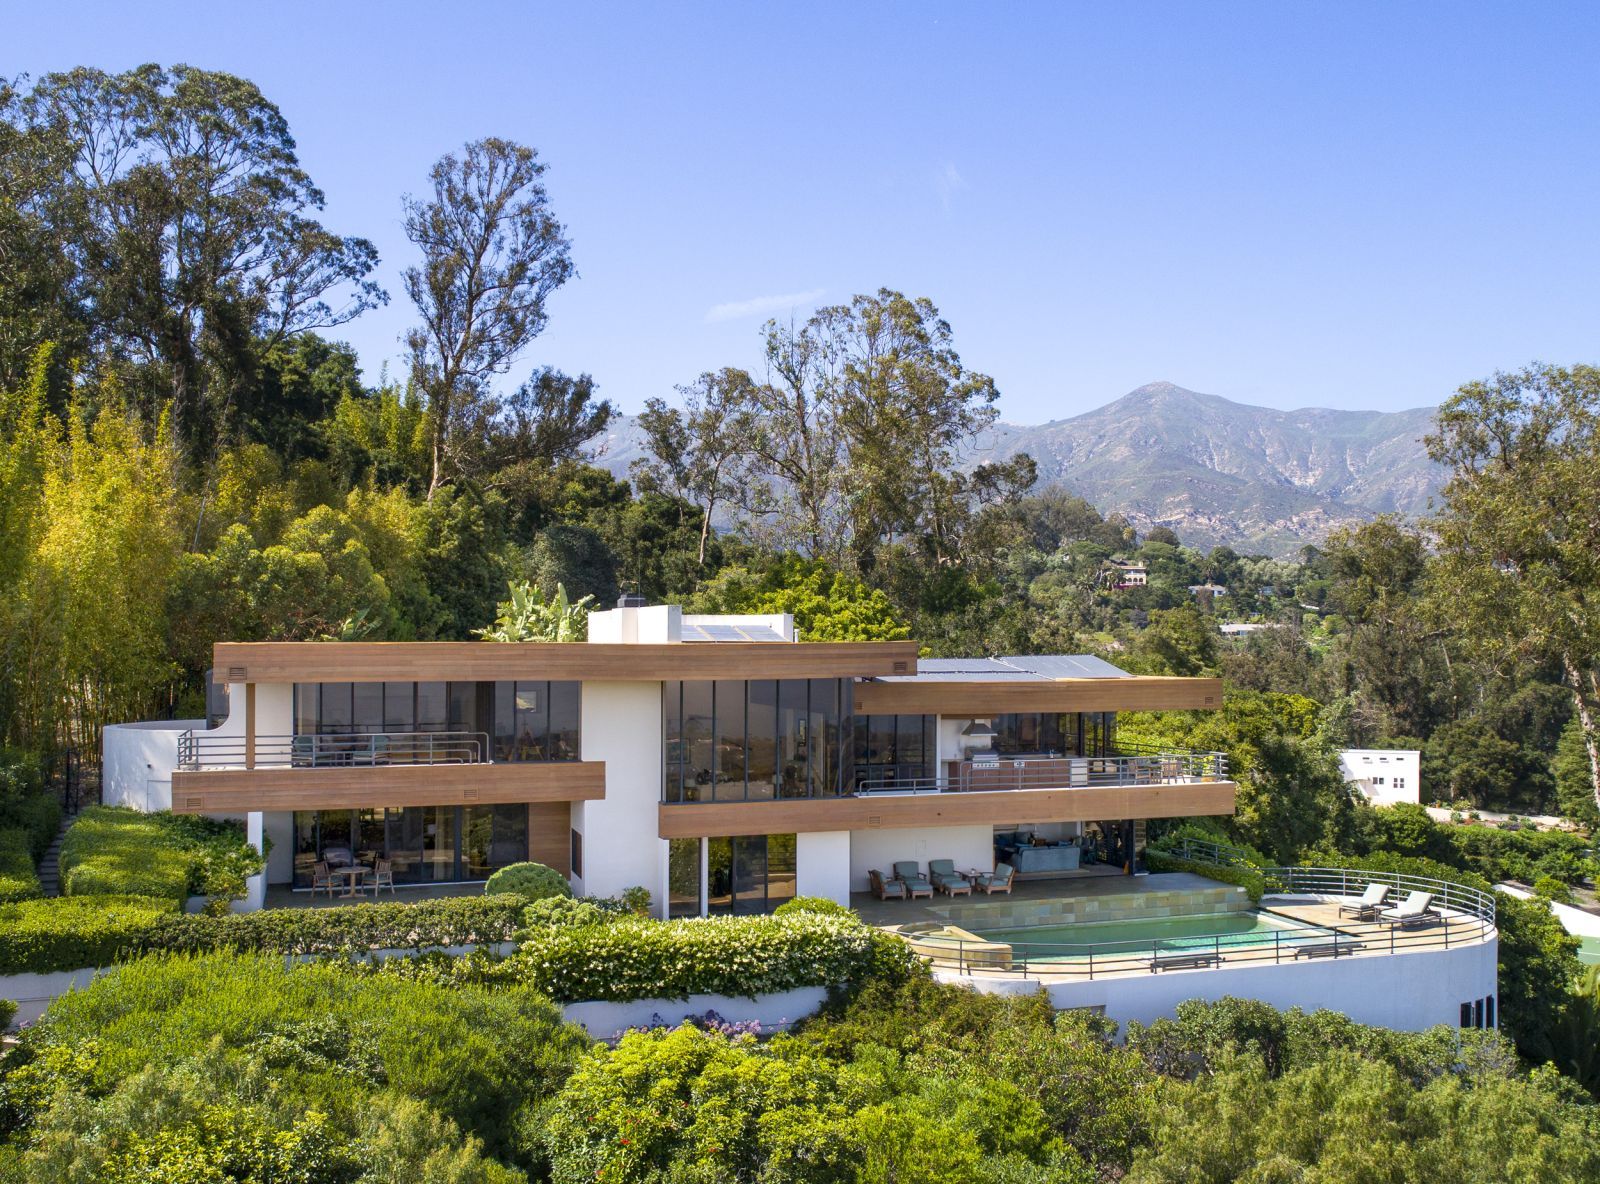 A luxury contemporary home in Montecito surrounded by lush vegetation with mountains in the background